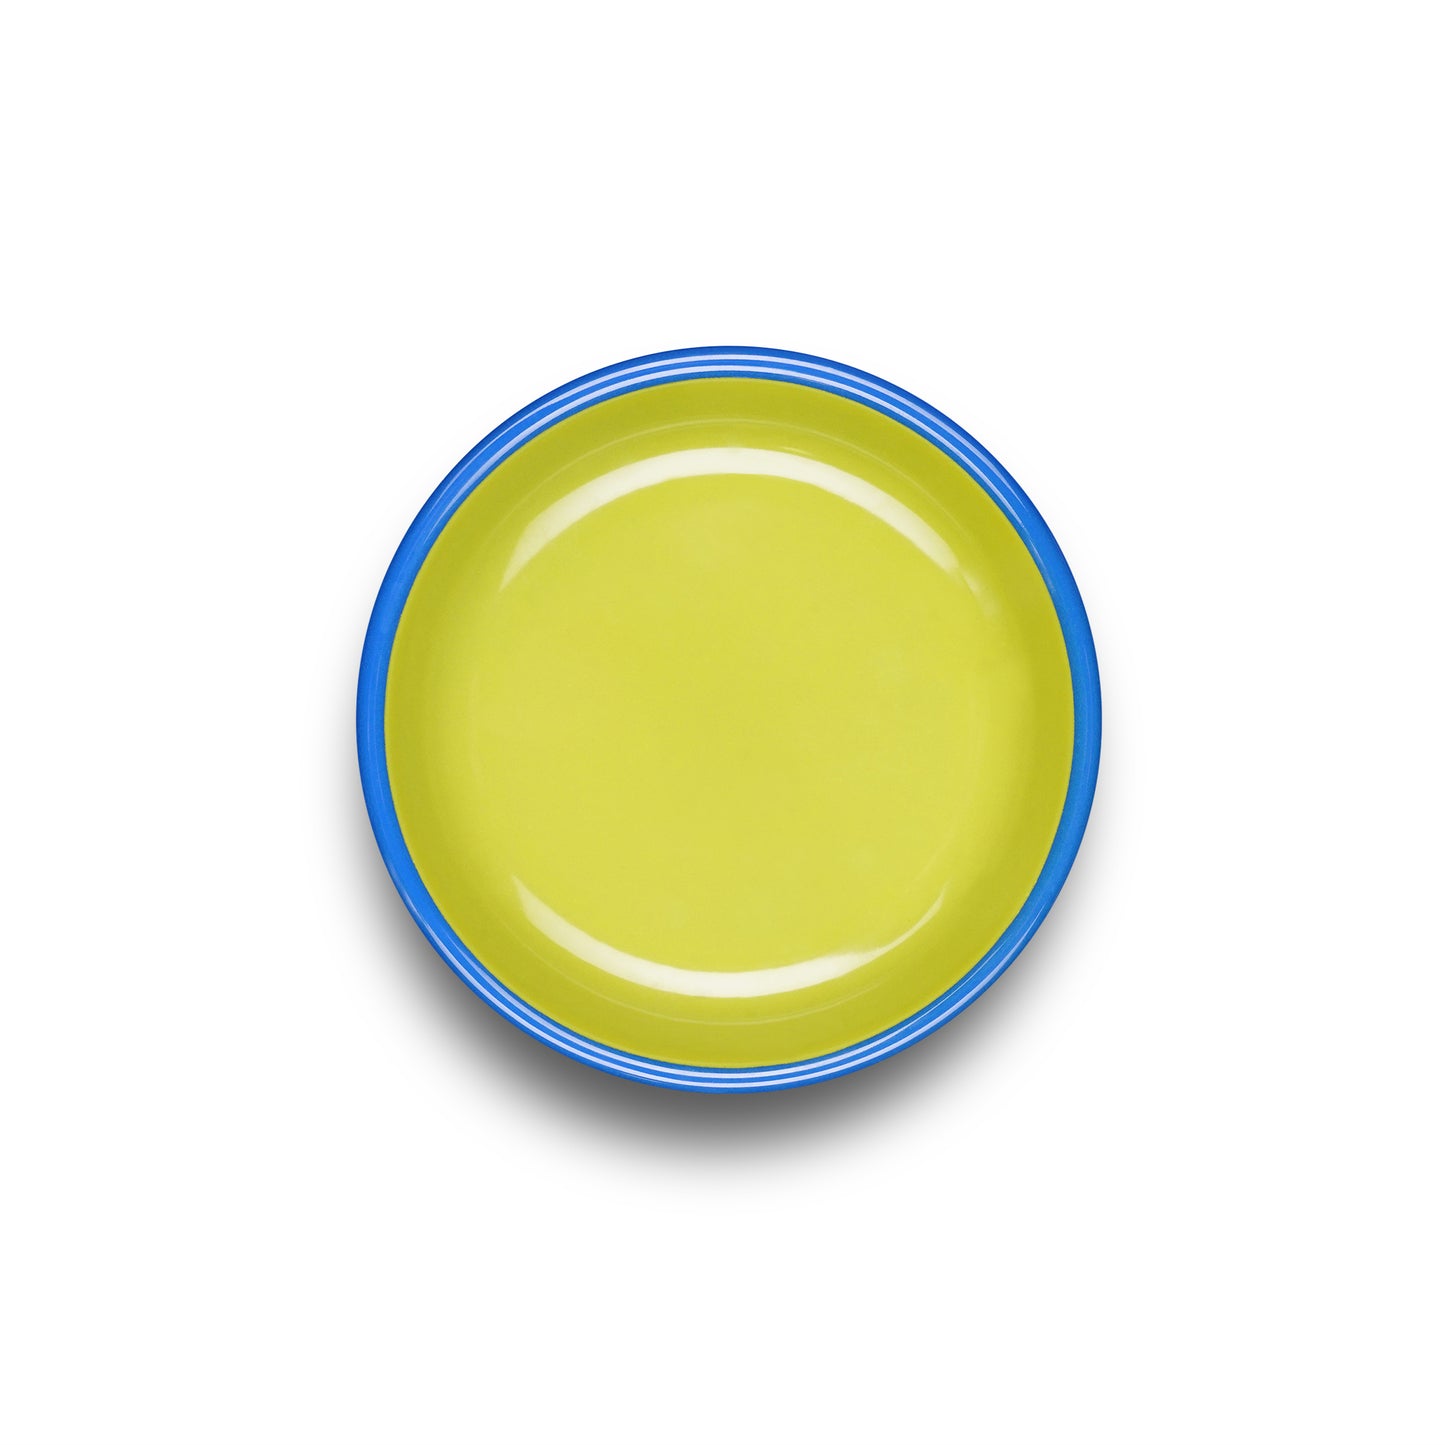 Colorama Small Plate 8" Chartreuse with Electric Blue Rim